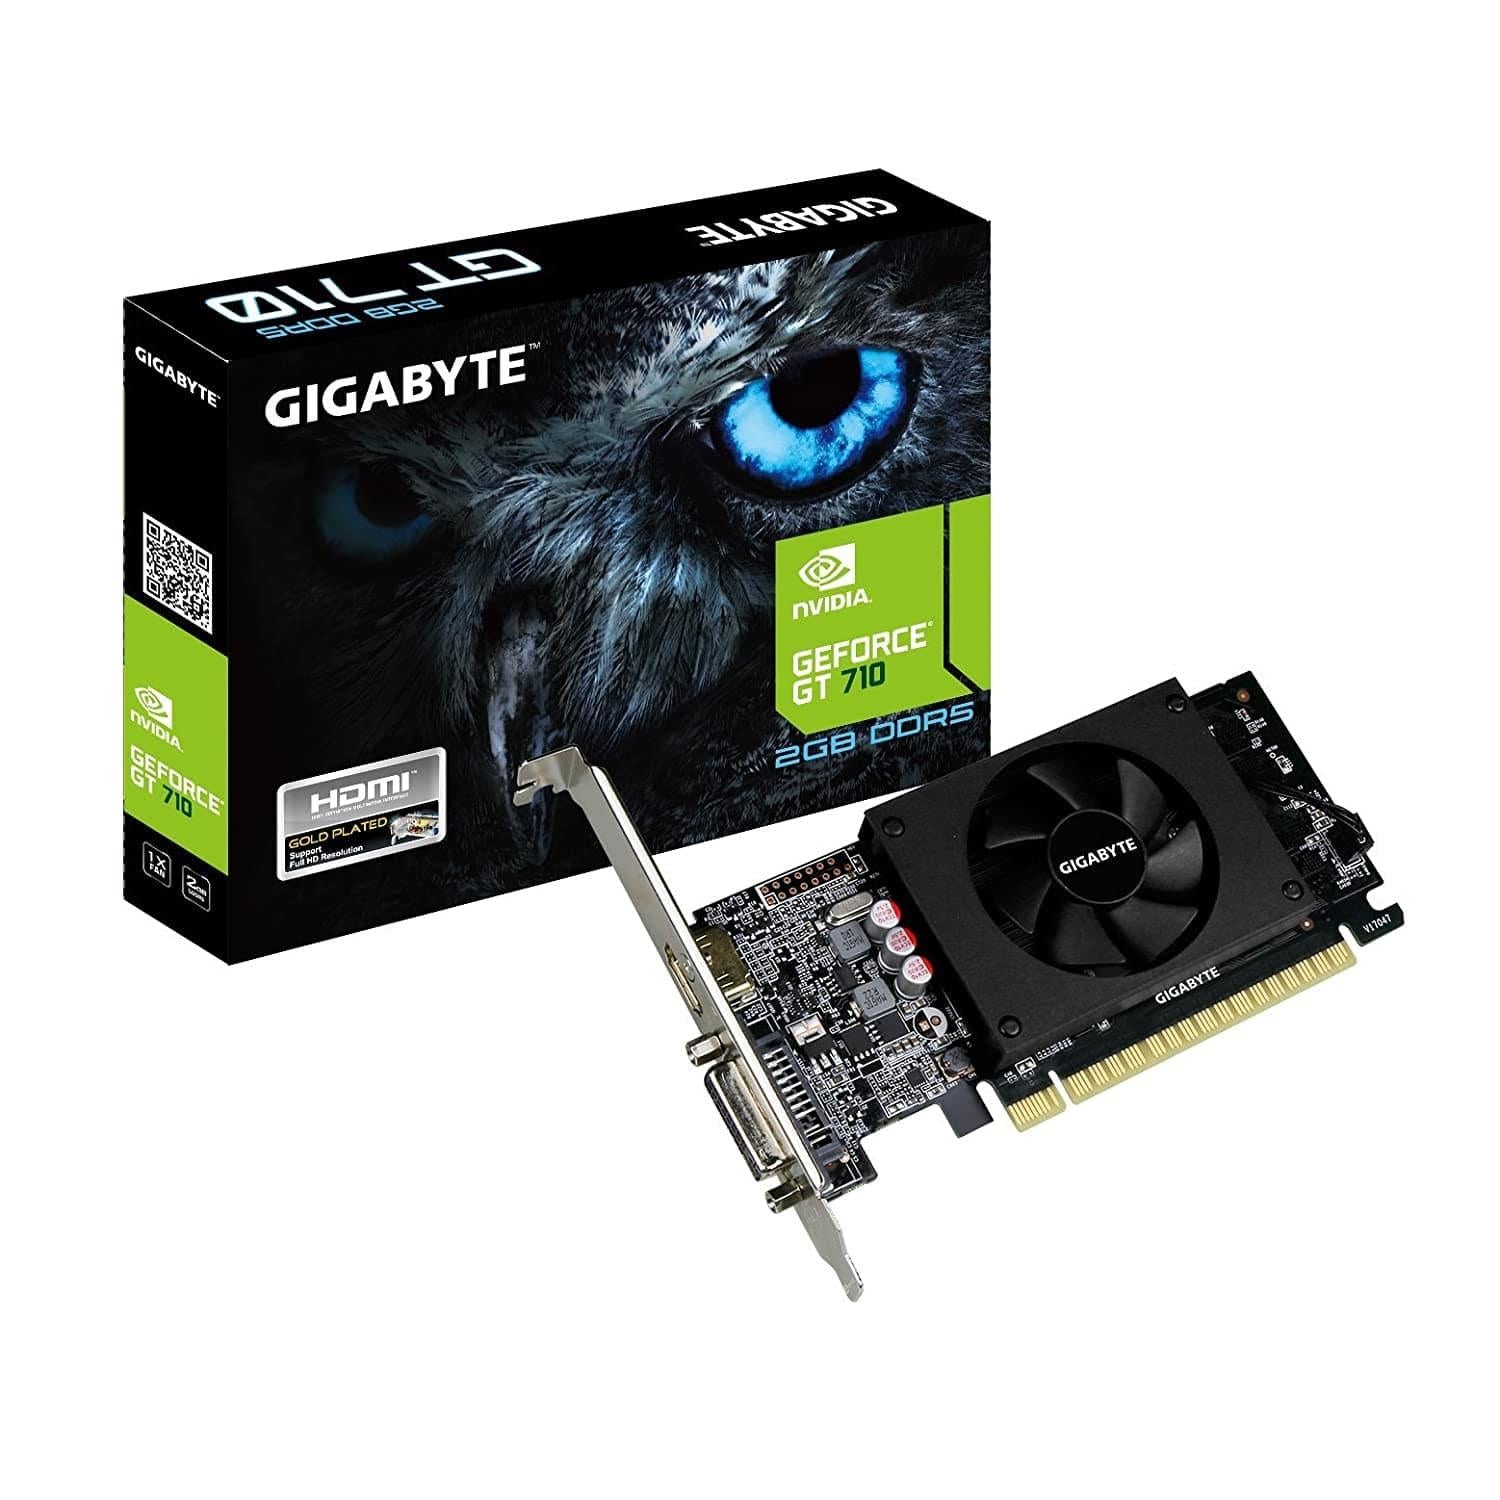 Gigabyte GeForce GT 710 2GB Graphic Cards Support PCI Express 2.0 X8 Bus Interface. Graphic Cards GV-N710D5-2GL-GRAPHICS CARD-dealsplant